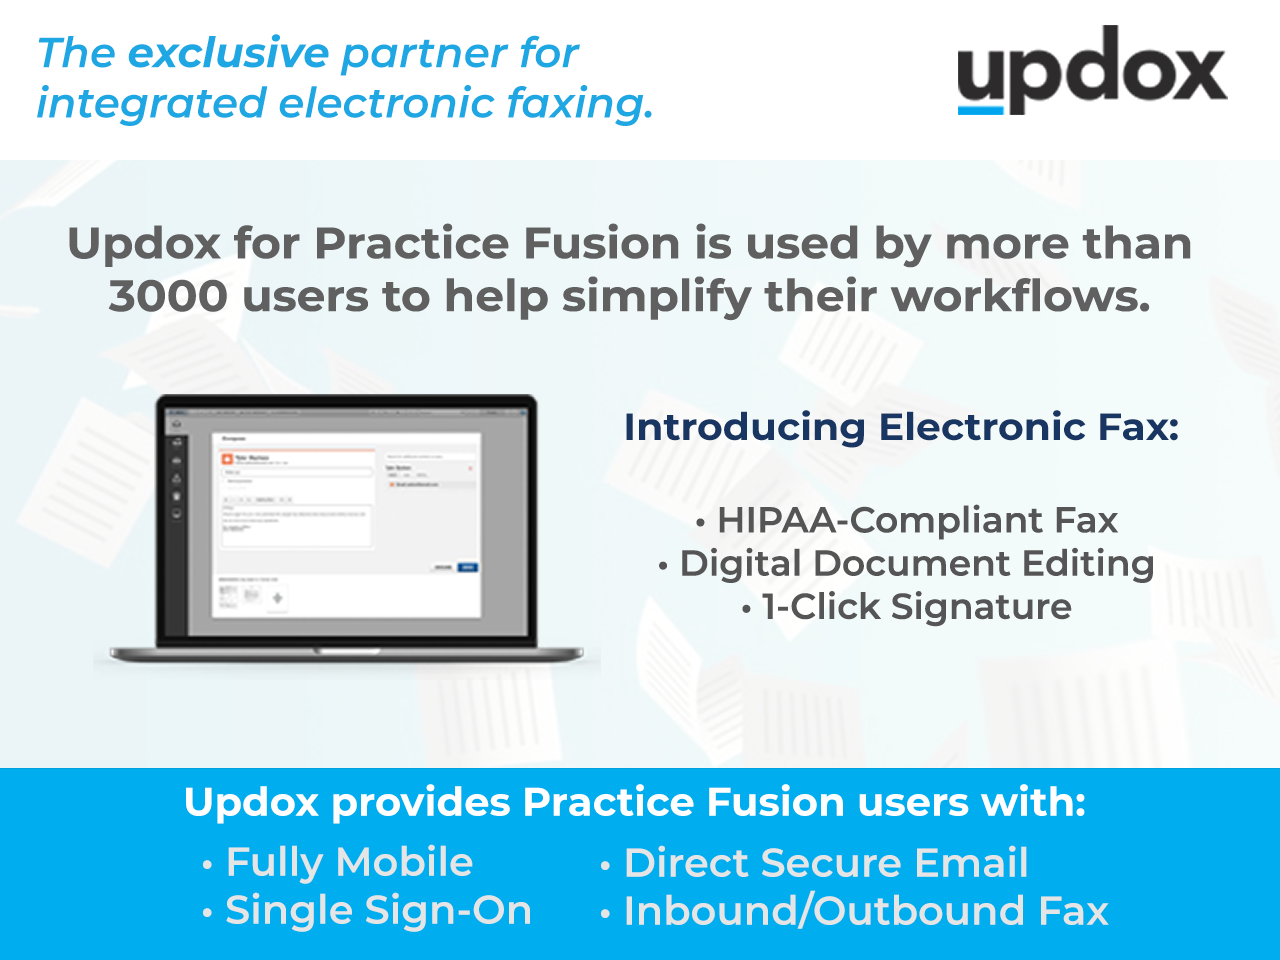 Updox for Practice Fusion is used by more than 3,000 user to help simplify their workflows.